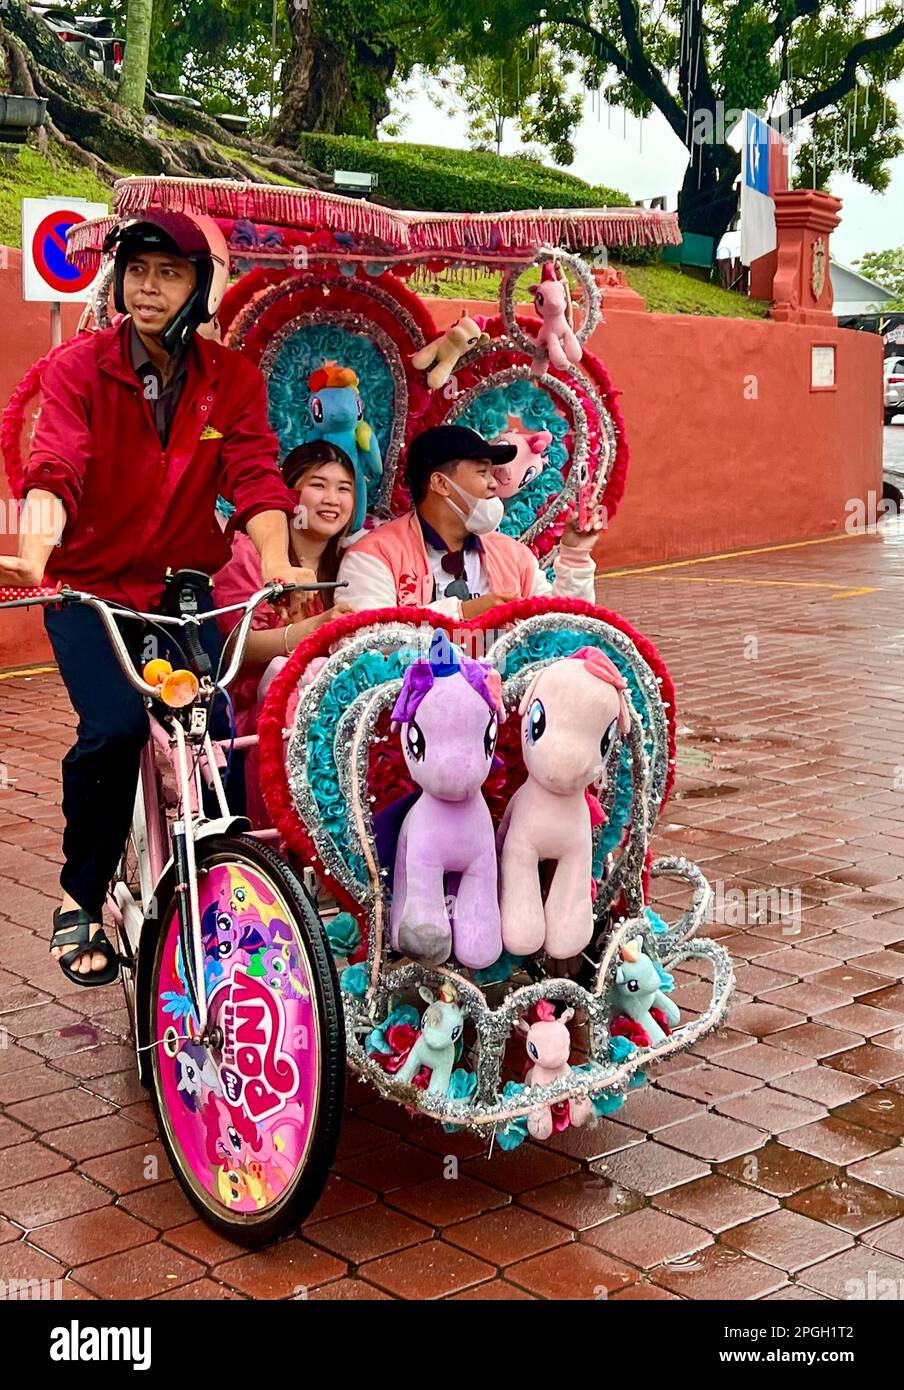 Malakka, Malaysia. 05th Mar, 2023. A rickshaw driver takes tourists on a city tour in his richly decorated vehicle on the theme of 'My Little Pony'. The World Heritage Site on the southwest coast of Malaysia is home to what must be the world's most insane rickshaws. Tourists can explore the city's colonial history amid a frenzy of stuffed animals and plastic roses. (to dpa 'The world's craziest rickshaws: With Hello Kitty through Malacca ') Credit: Carola Frentzen/dpa/Alamy Live News Stock Photo